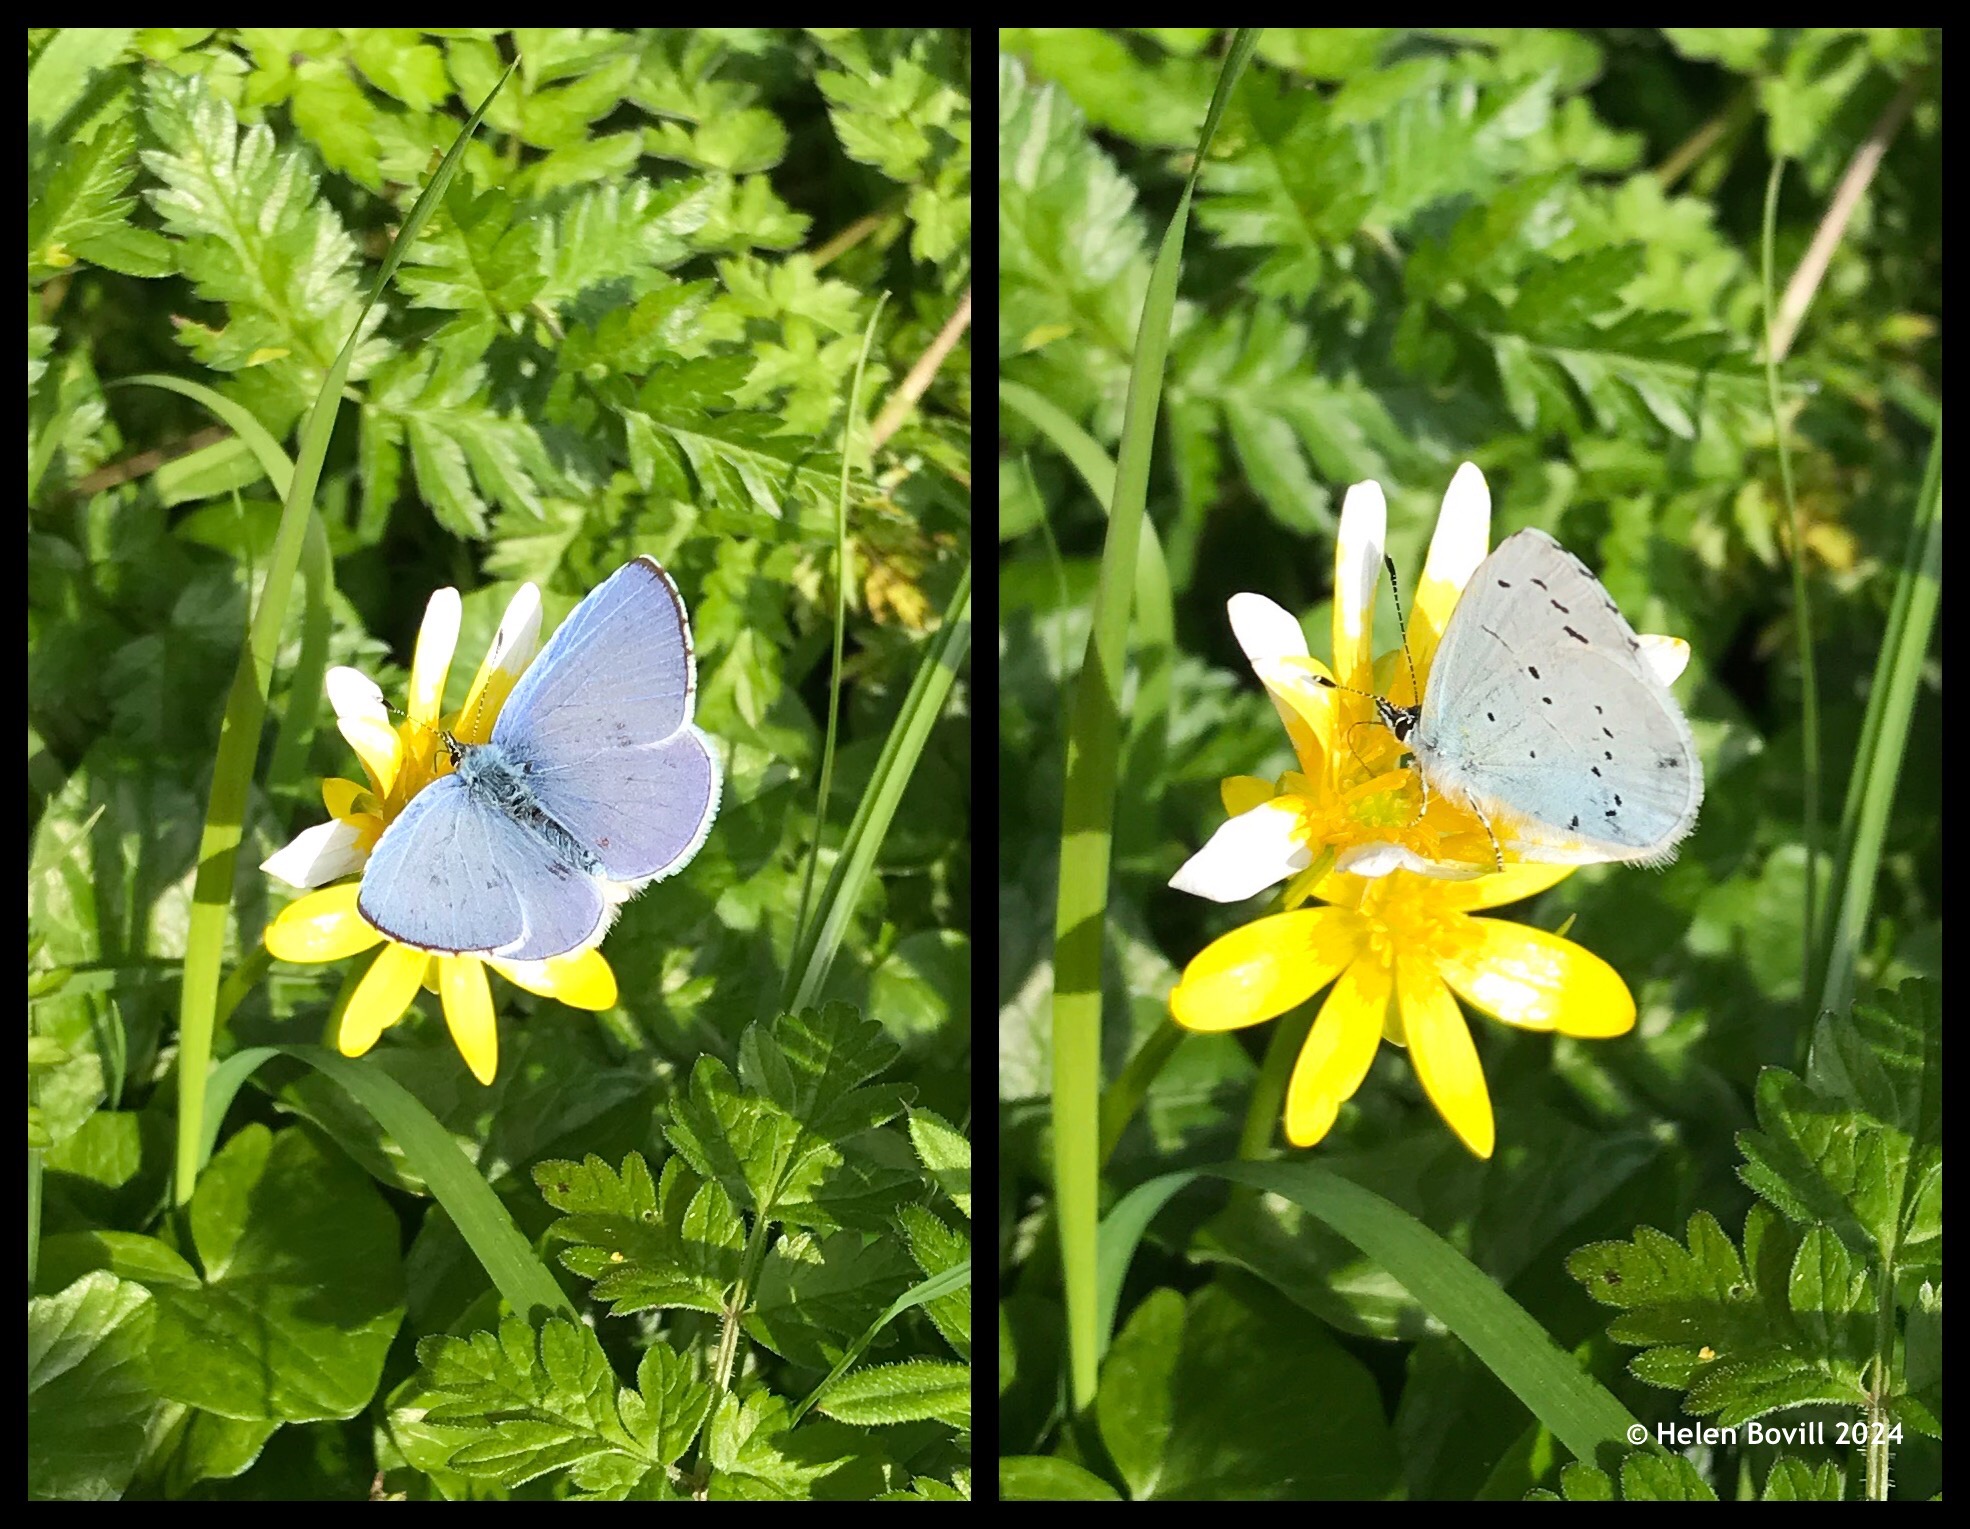 Two photos of a Holly Blue butterfly - one with wings open, the other with wings closed, feeding on acelandine